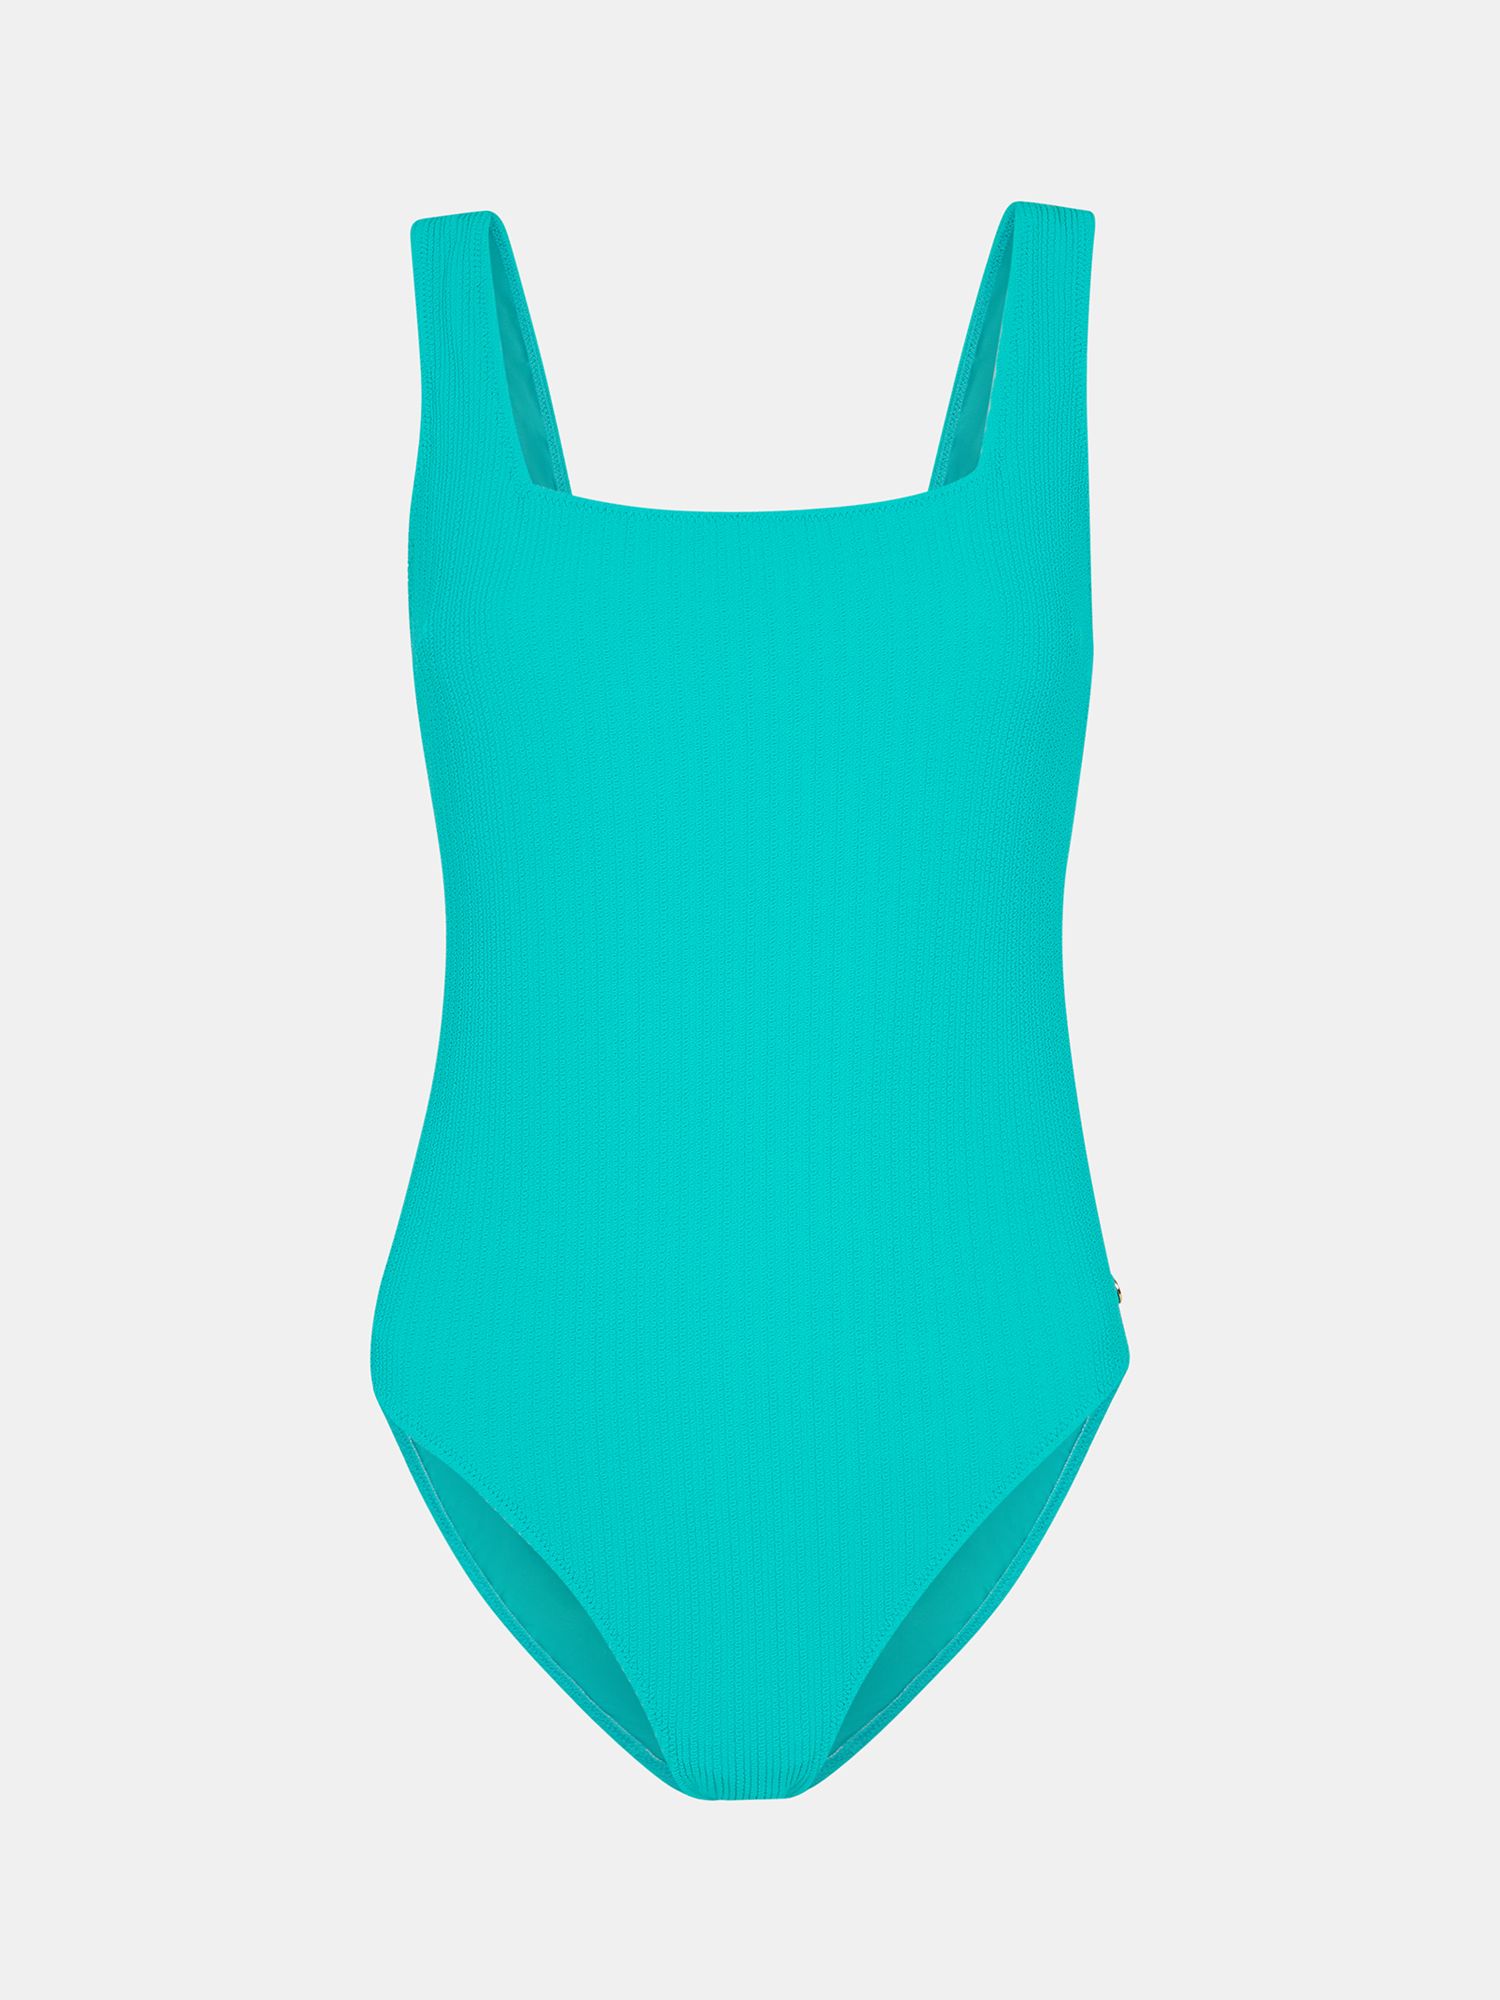 Whistles Textured Square Neck Swimsuit, Turquoise, 6